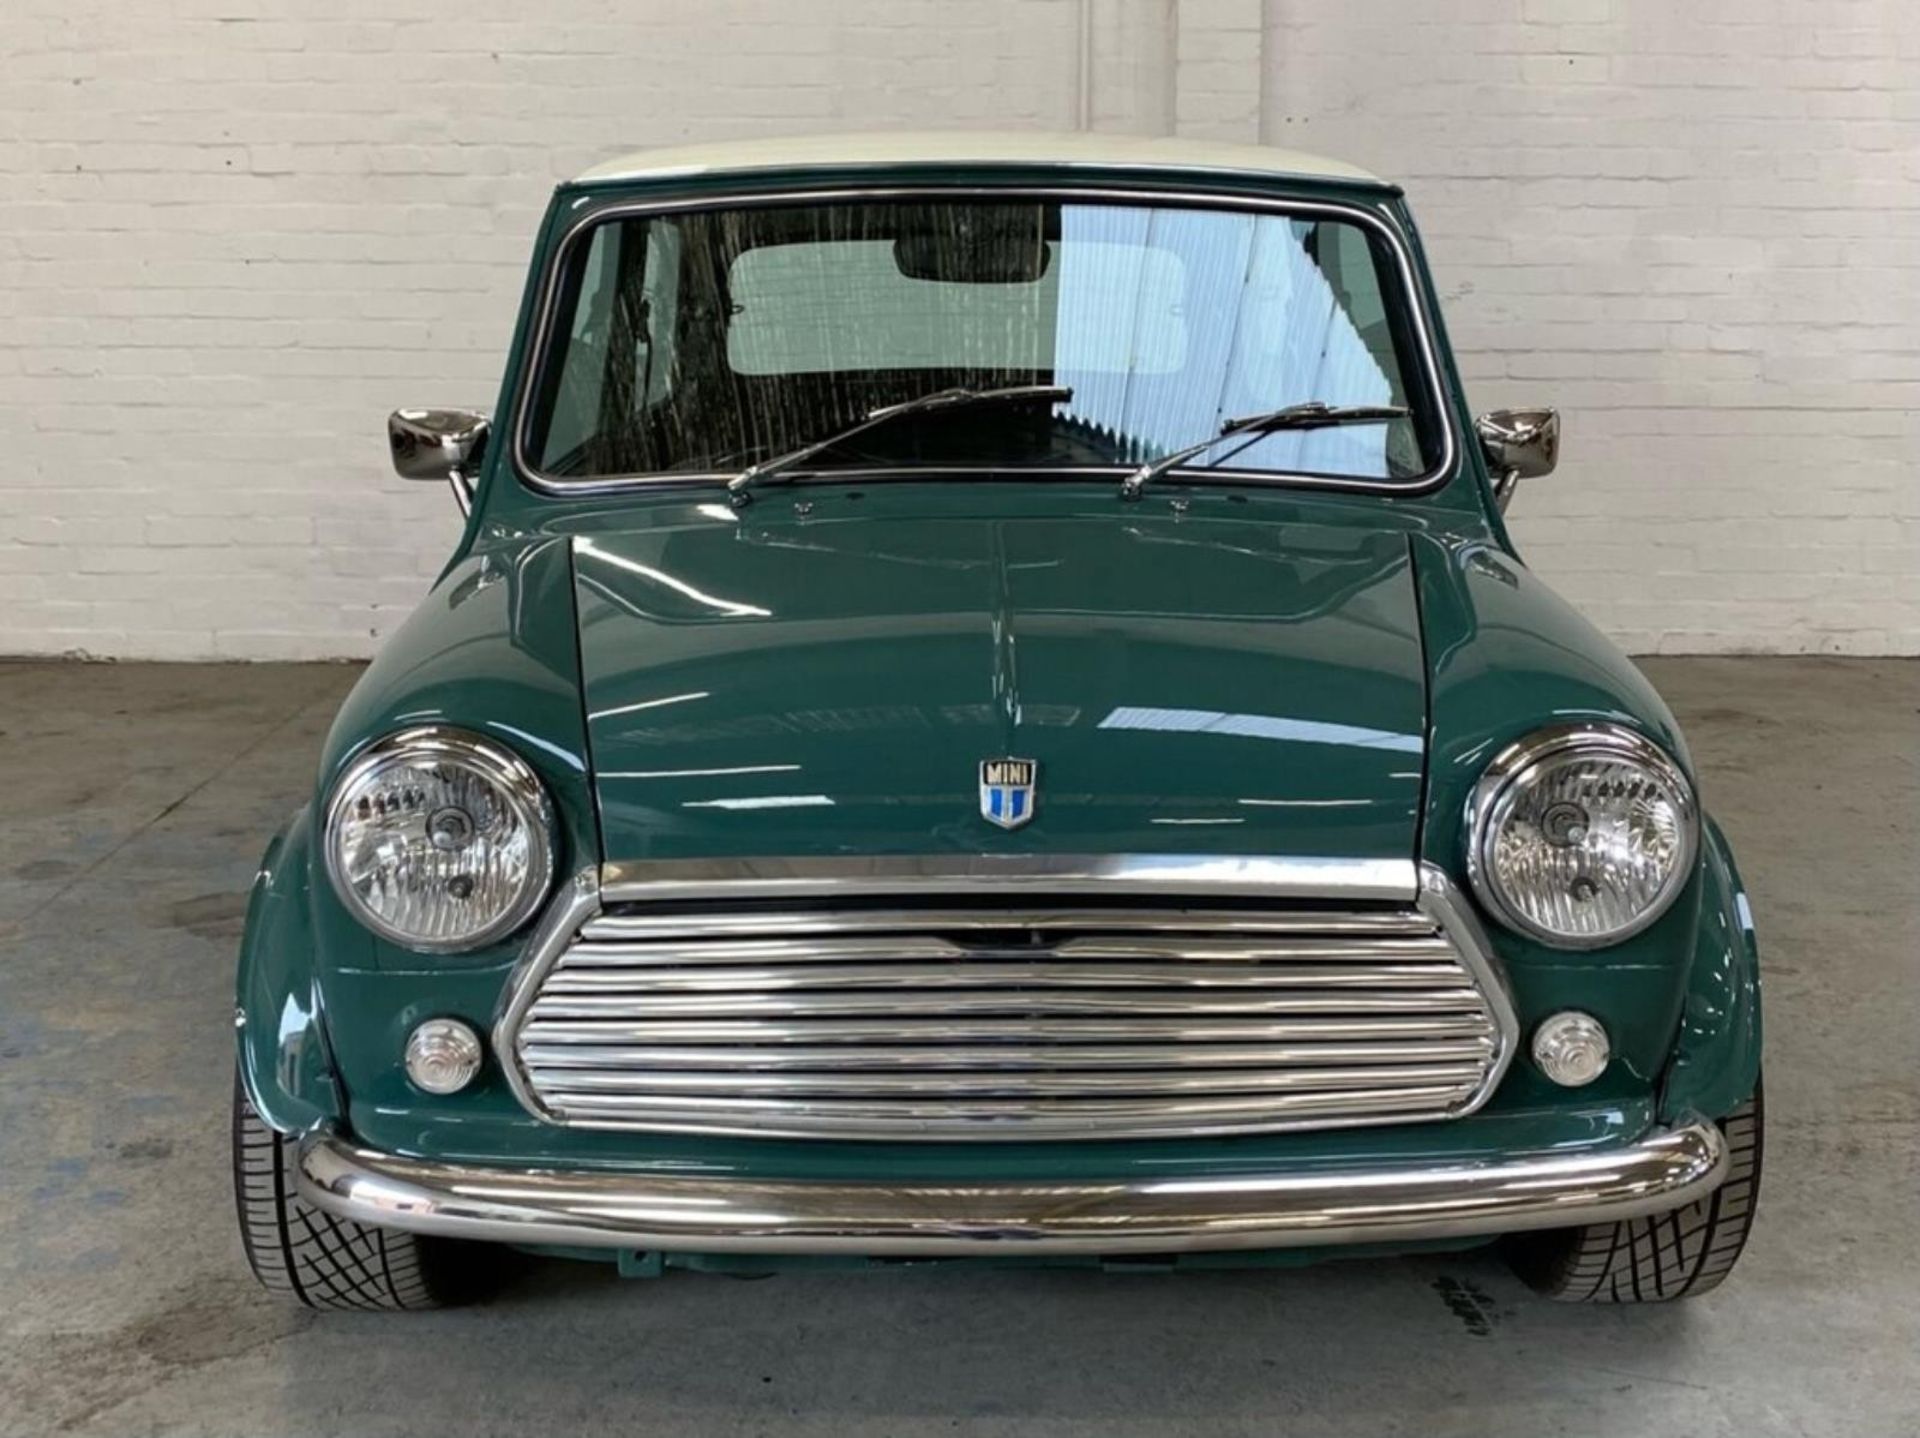 1971 Mini Cooper S Recreation Registration number KFB 656J Green with a white roof Black interior - Image 9 of 18